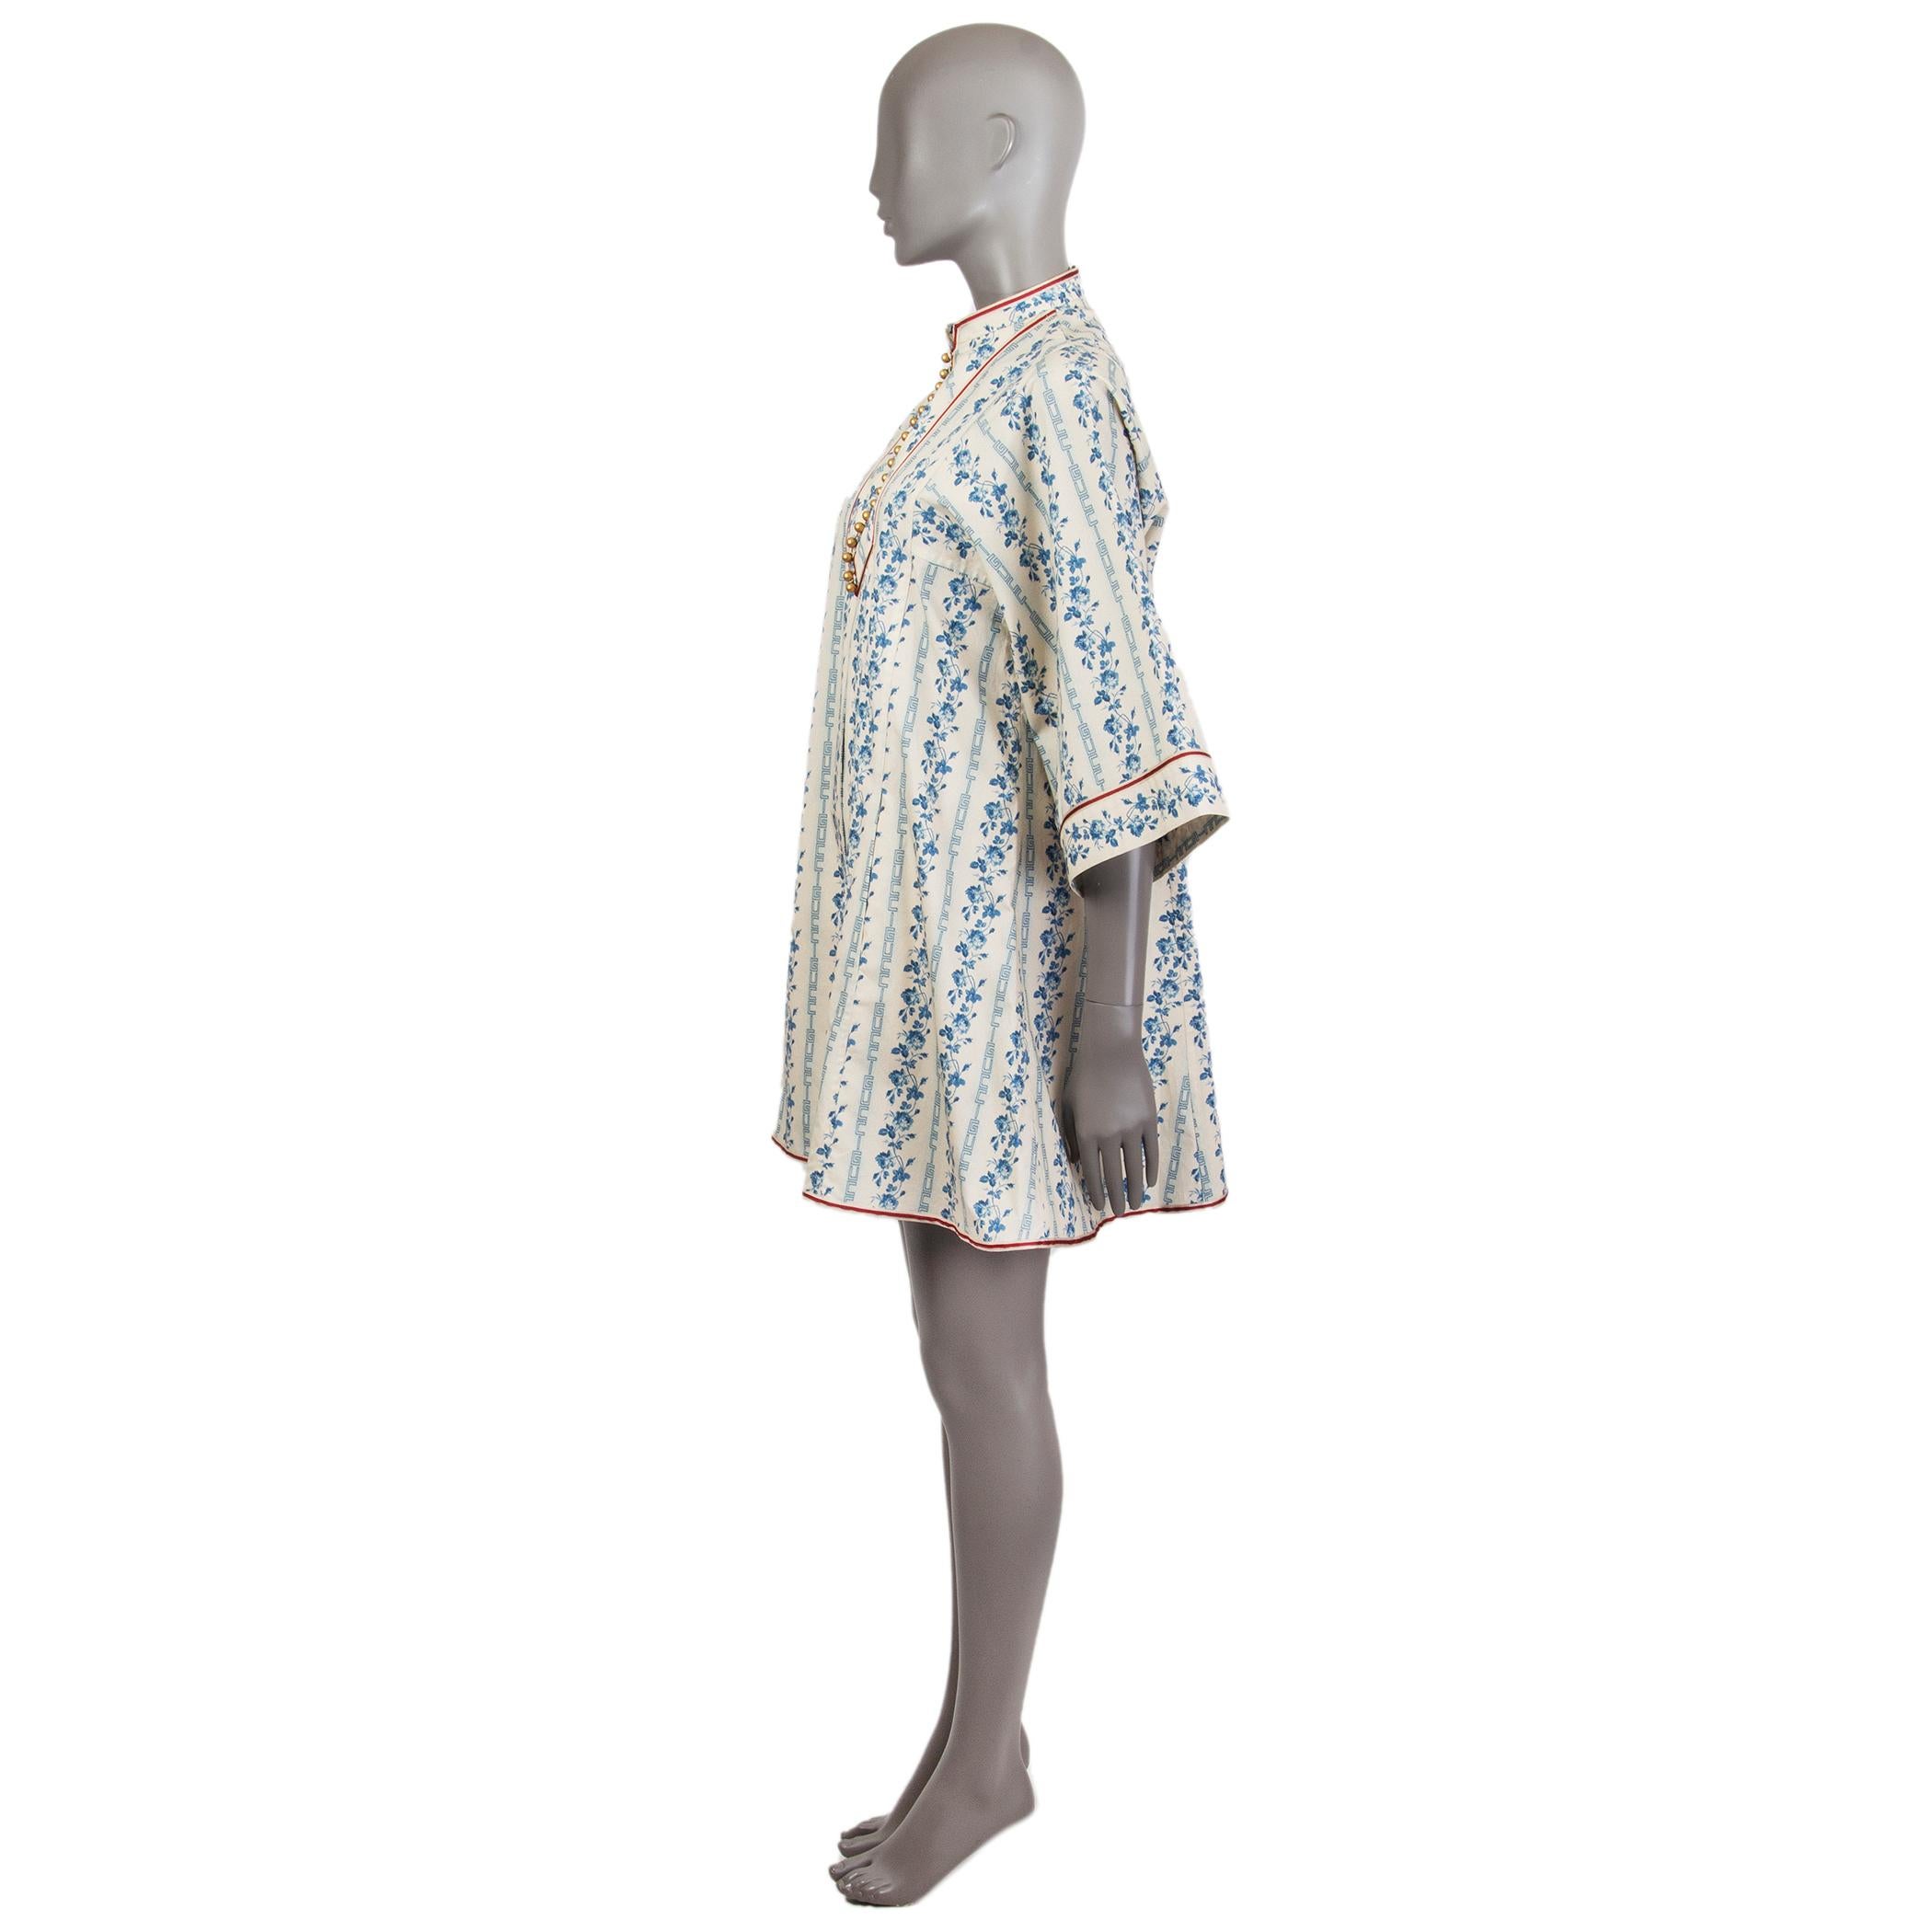 Gucci 3/4-sleeve porcelain print mini dress in off-white and blue cotton (97%) and elastane (3%) with a mandarin collar that has gold-tone buttons which fasten up on the front. Has a red and off-white fabric detail around the collar, cuffs, and